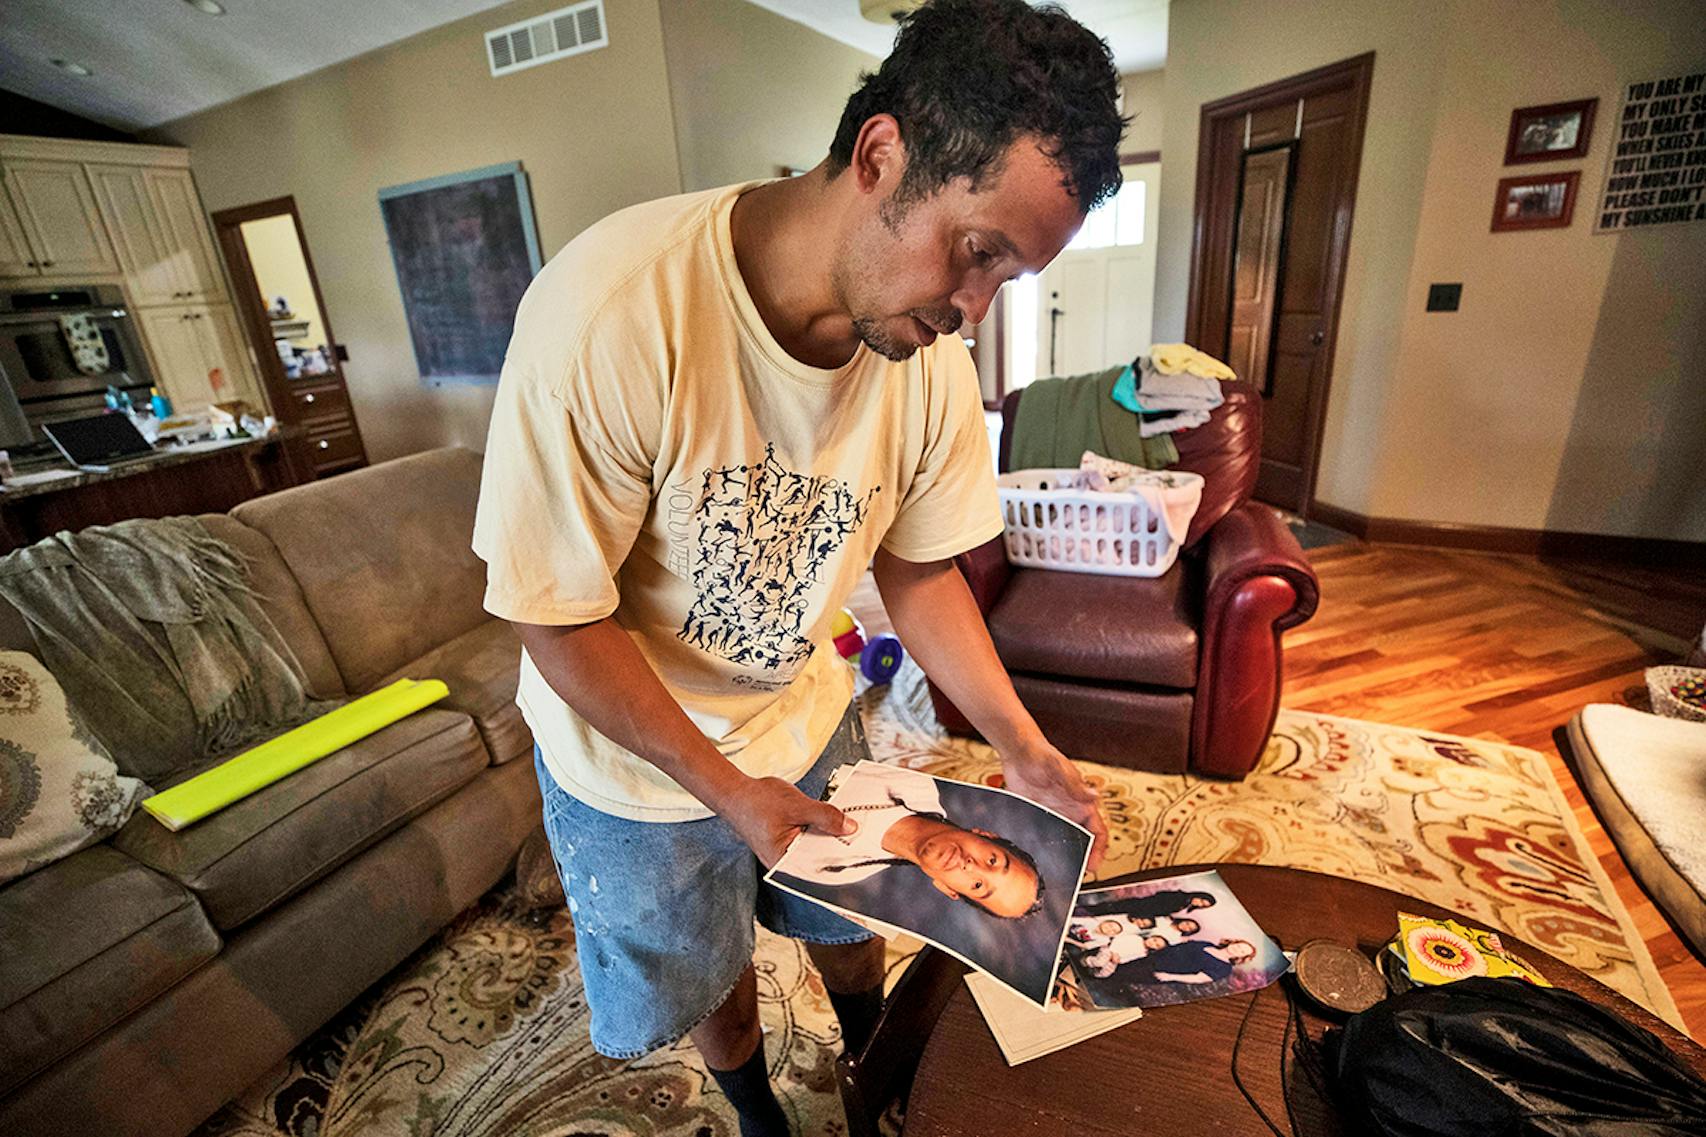 Willie Finley's brother Tremaine was shot and killed 14 years ago in south Minneapolis. On recent Sunday, he spent time looking at photos of his brother.